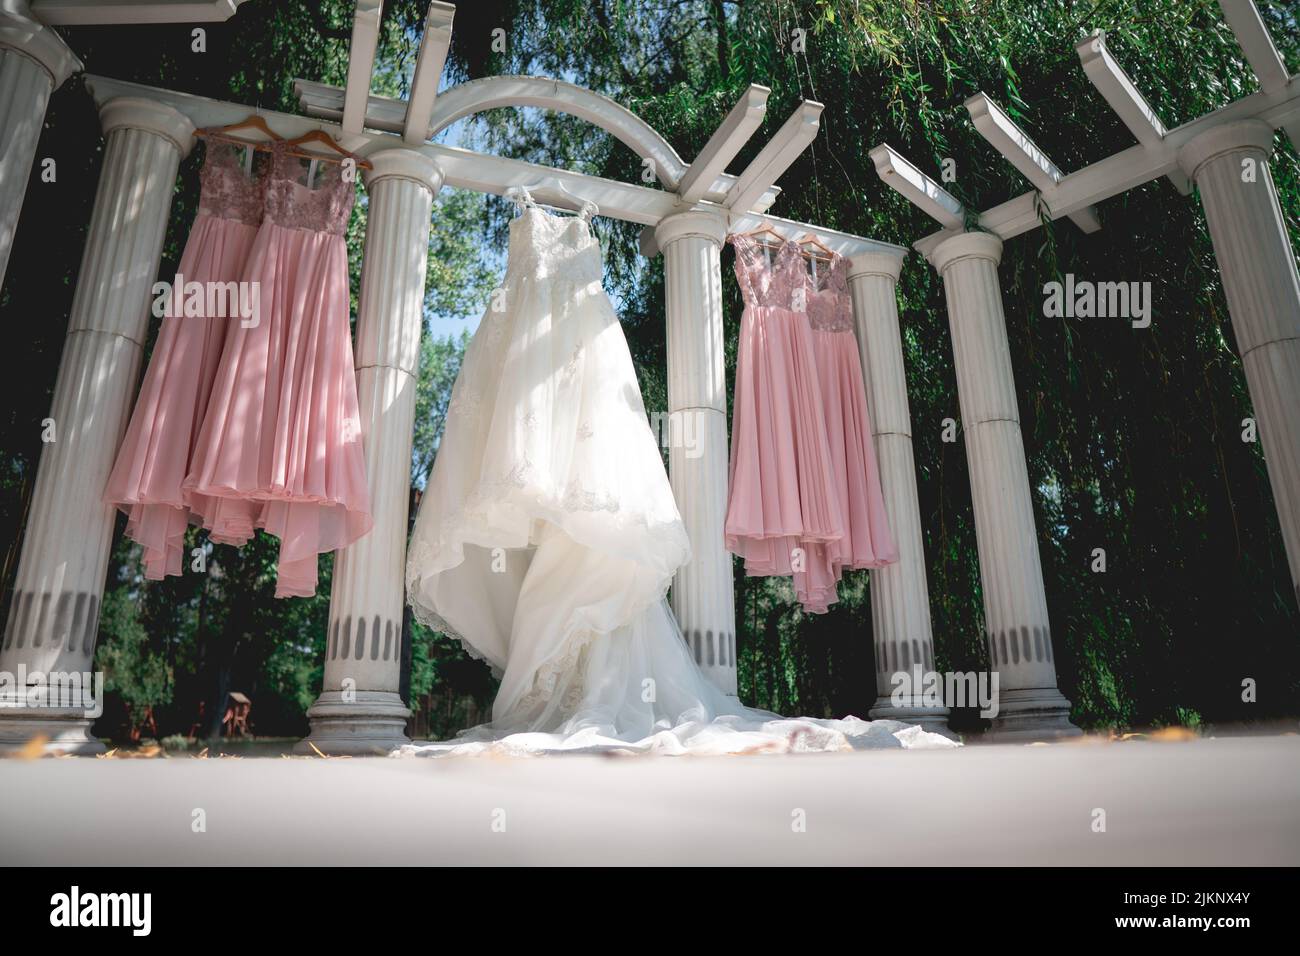 The dresses of the bride and the bridesmaids hung at the venue Stock Photo